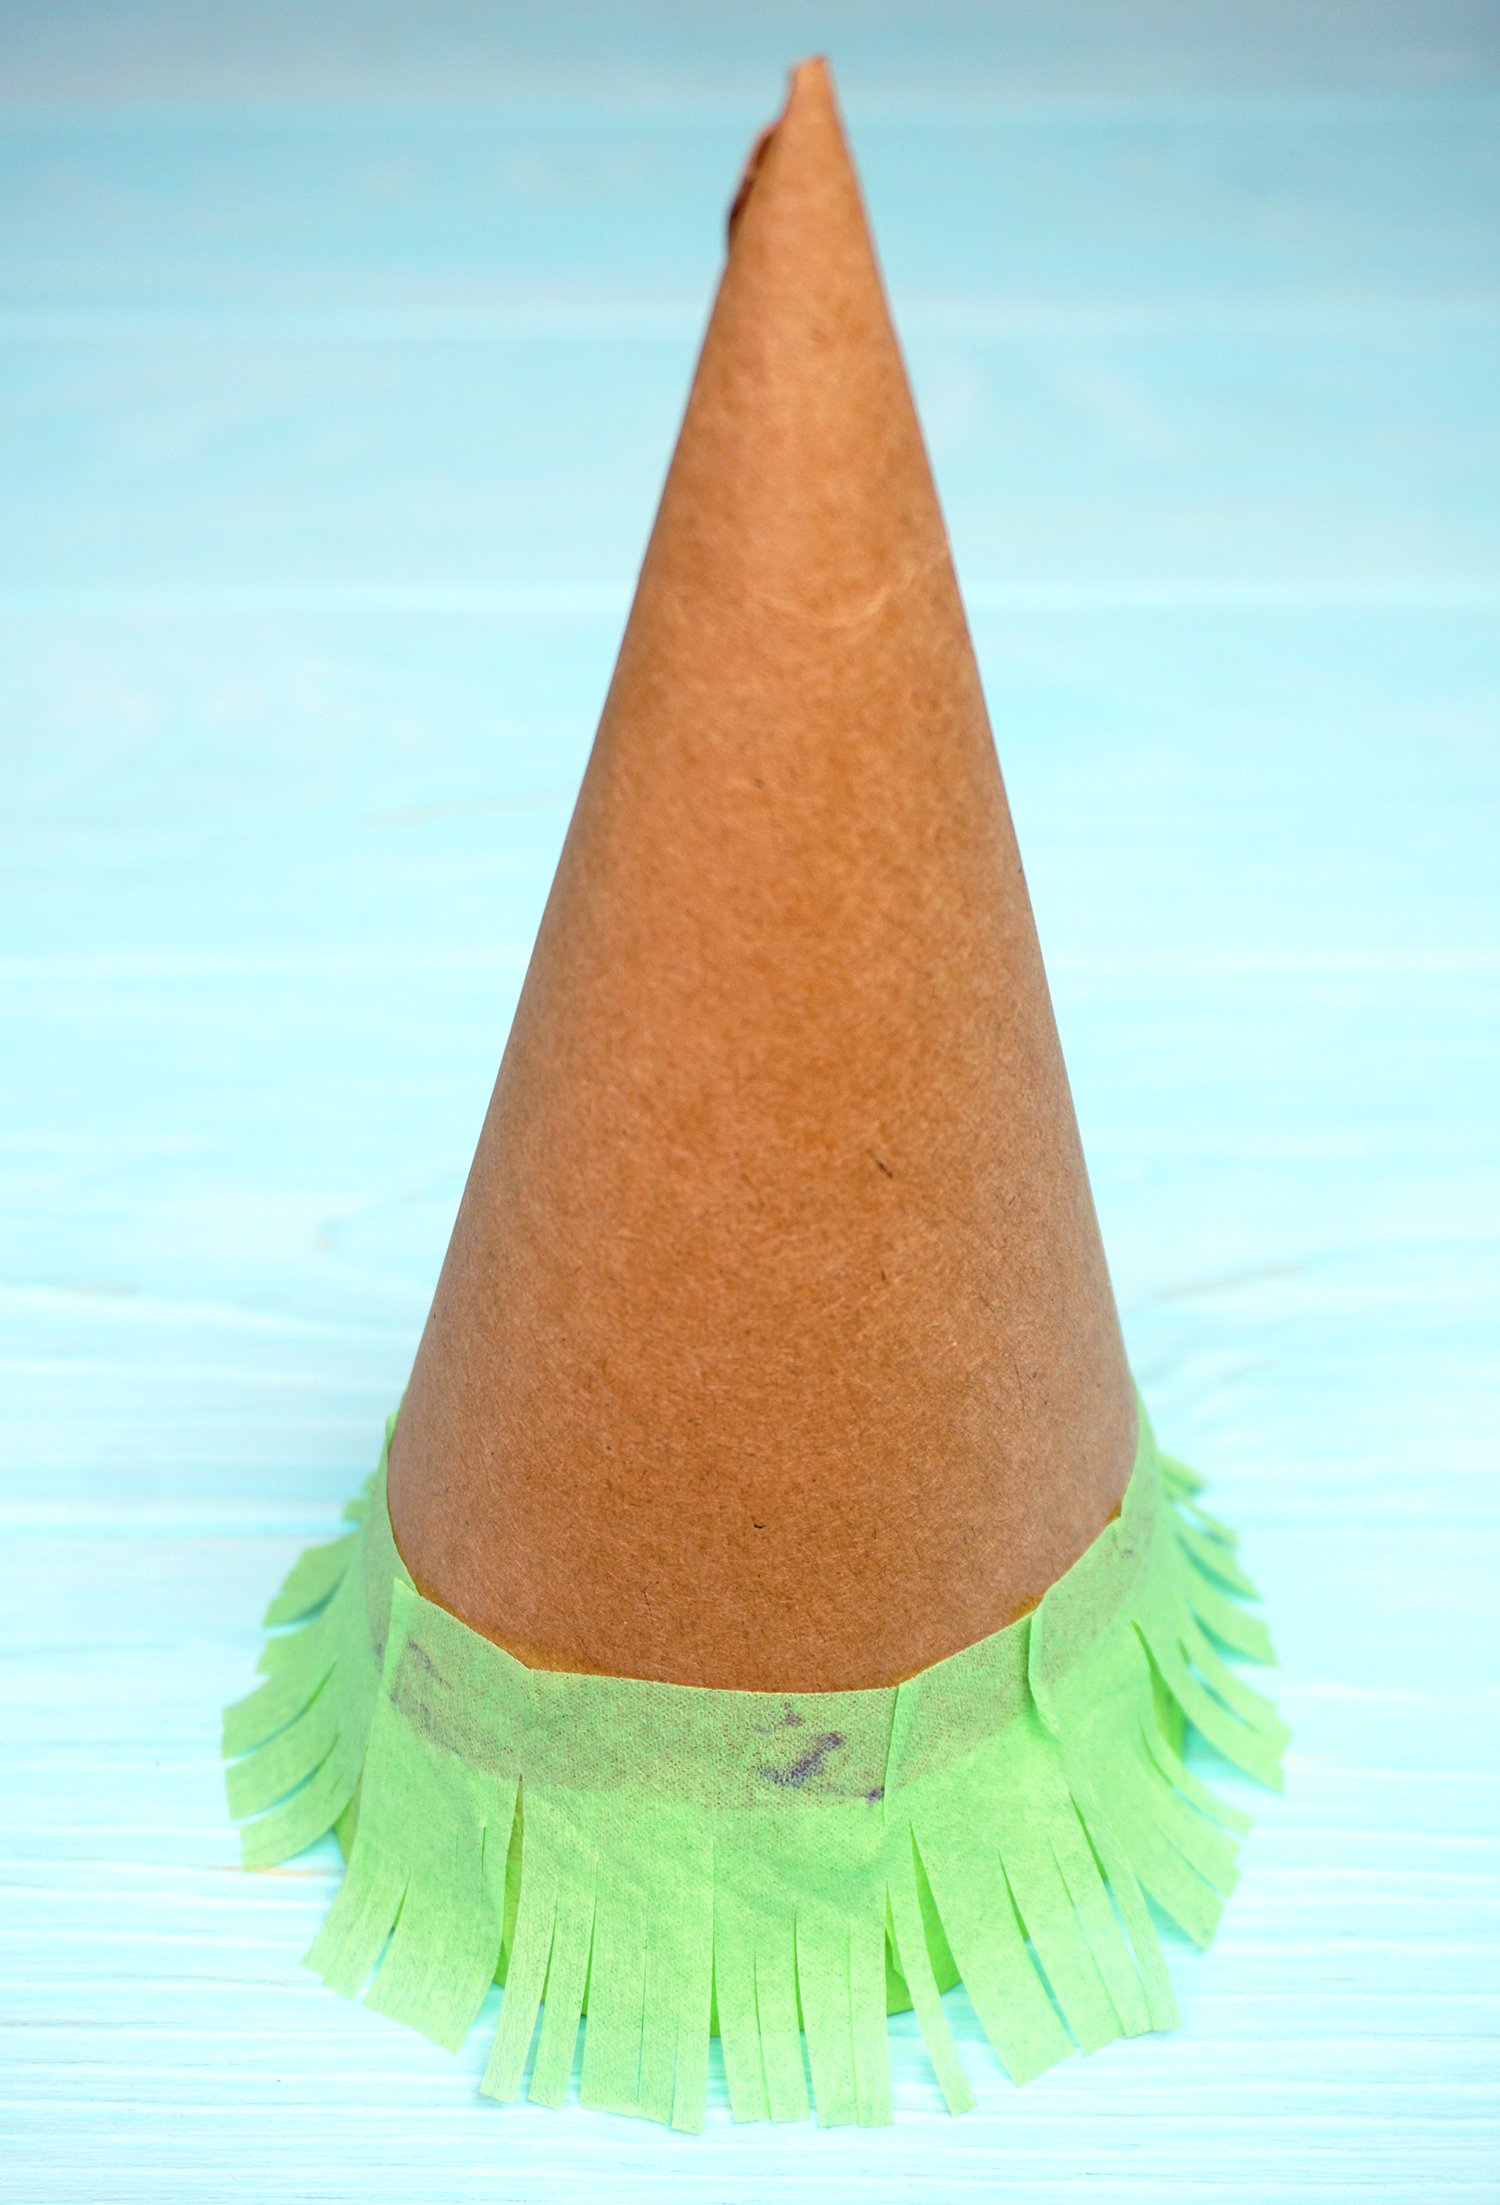 glueing fringed crepe paper to sides of cone